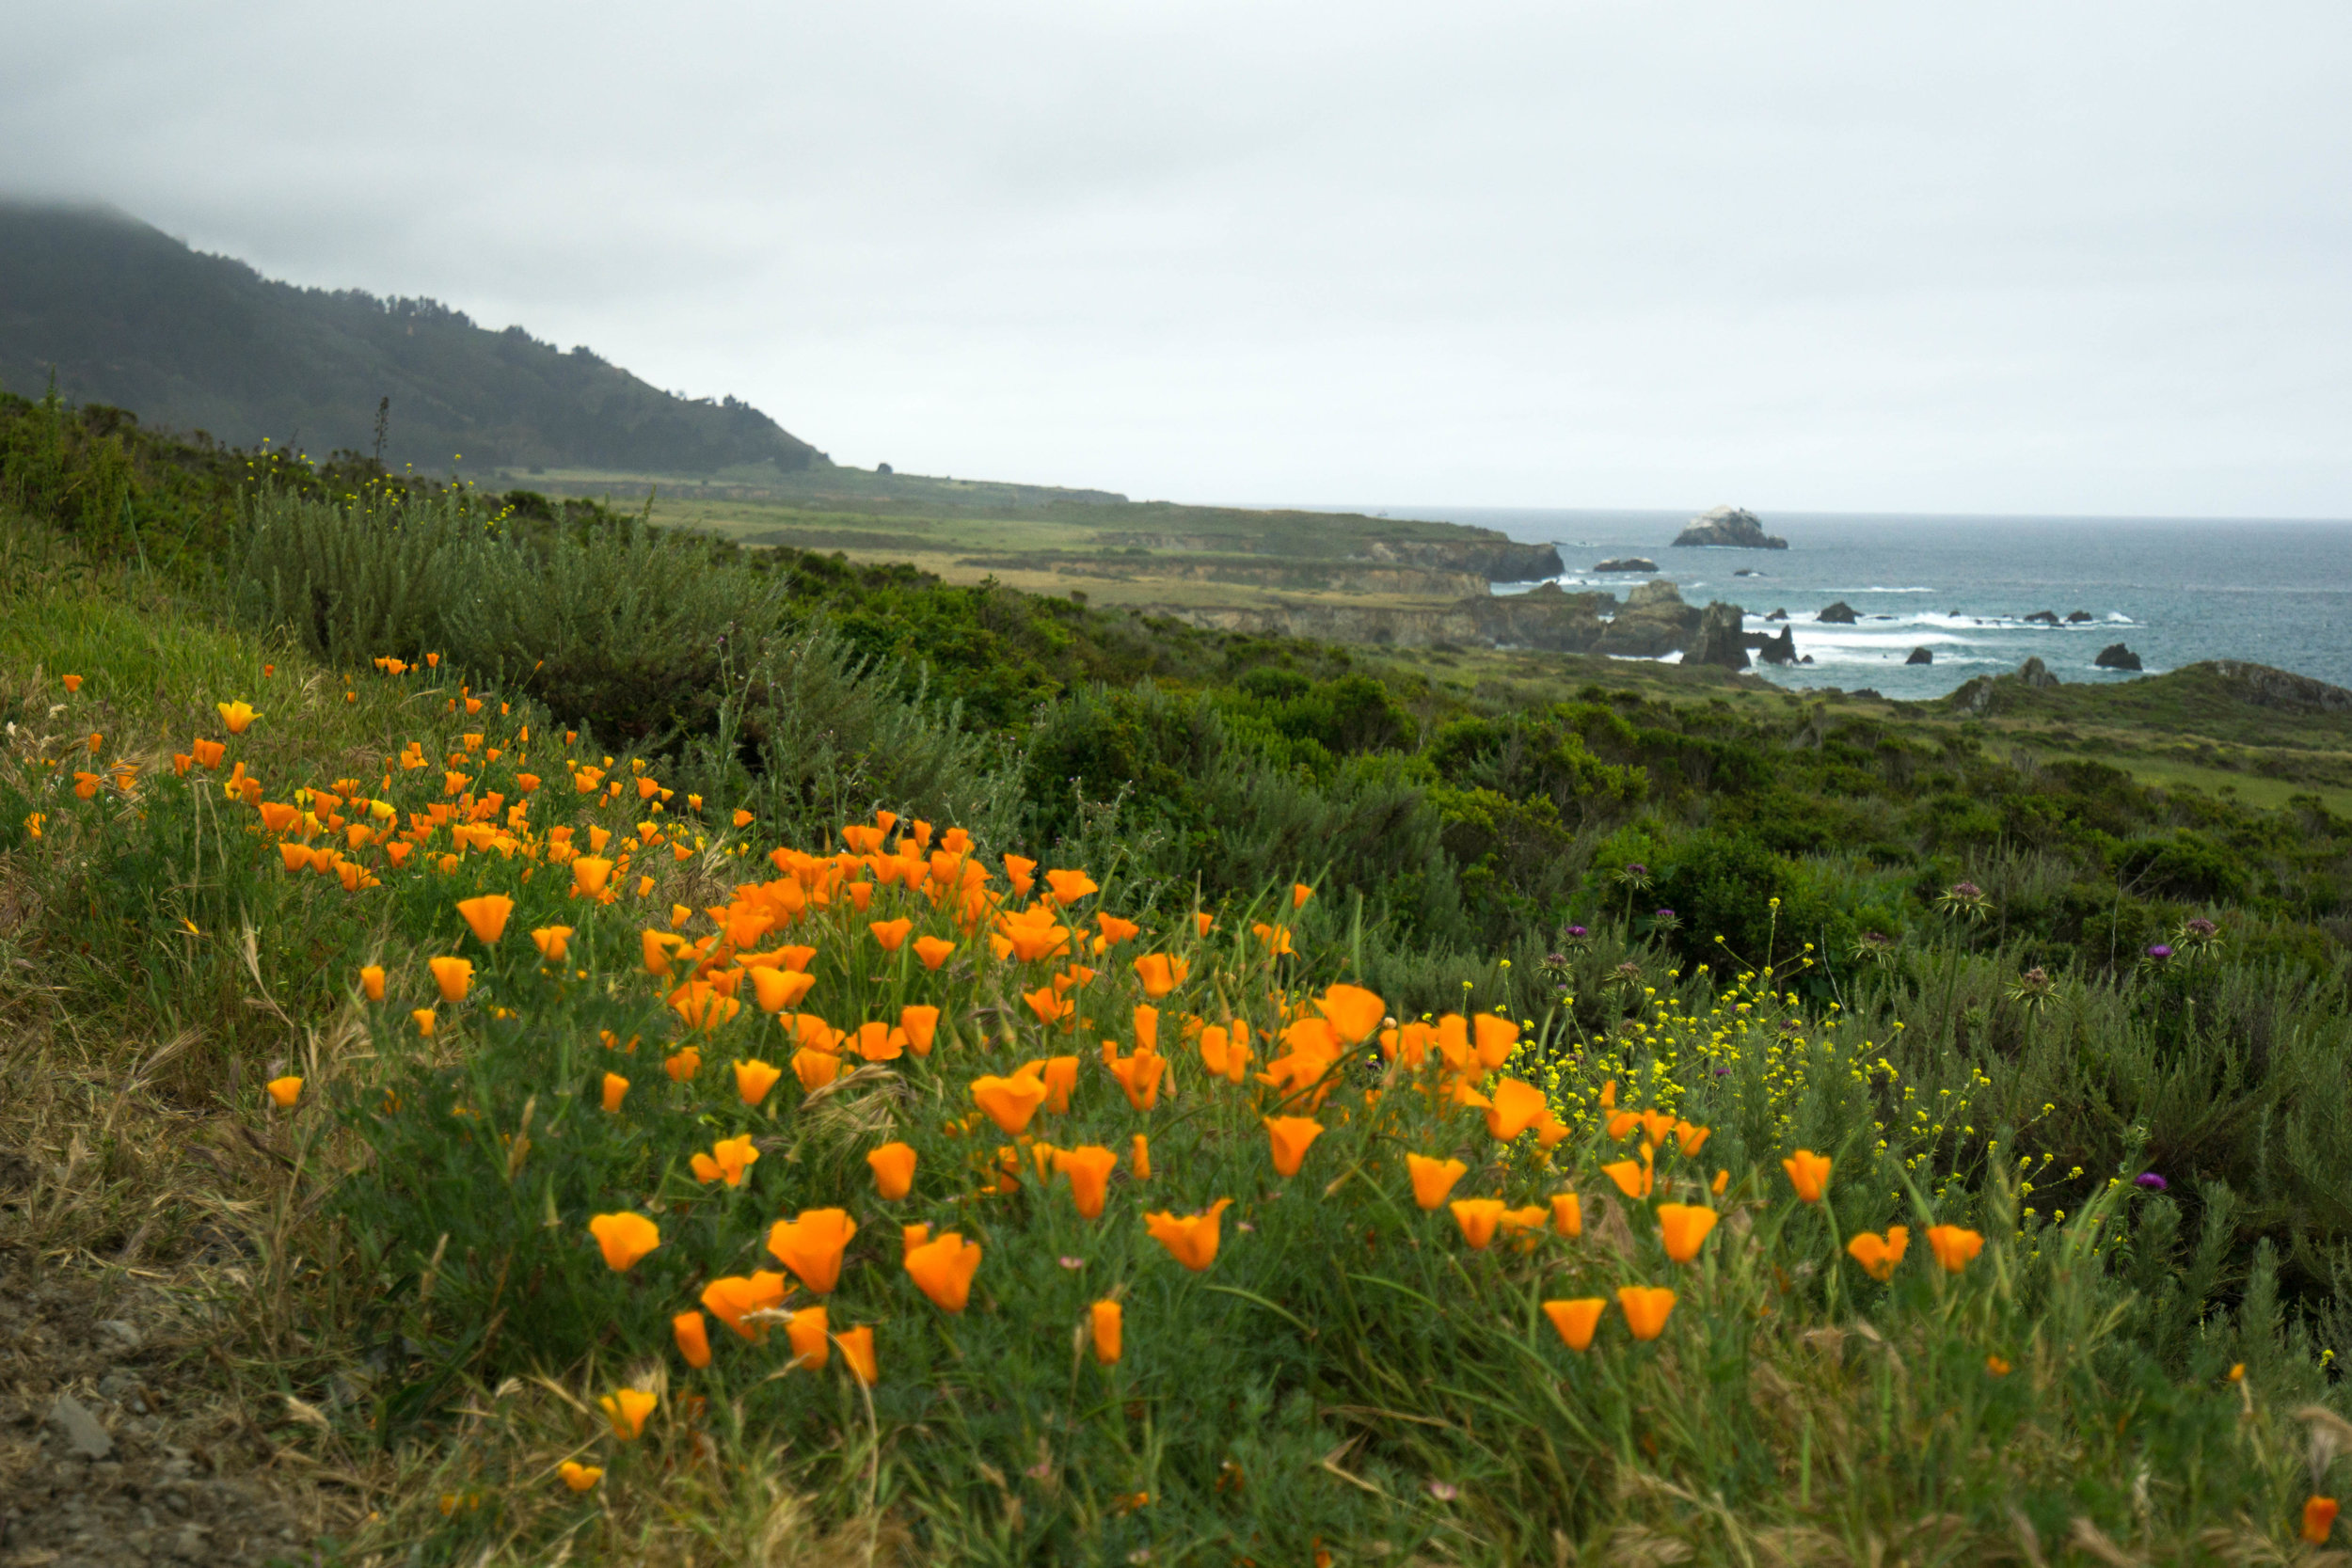 Blooming wildflowers color this coastal canvas on our journey home. Bye bye Big Sur